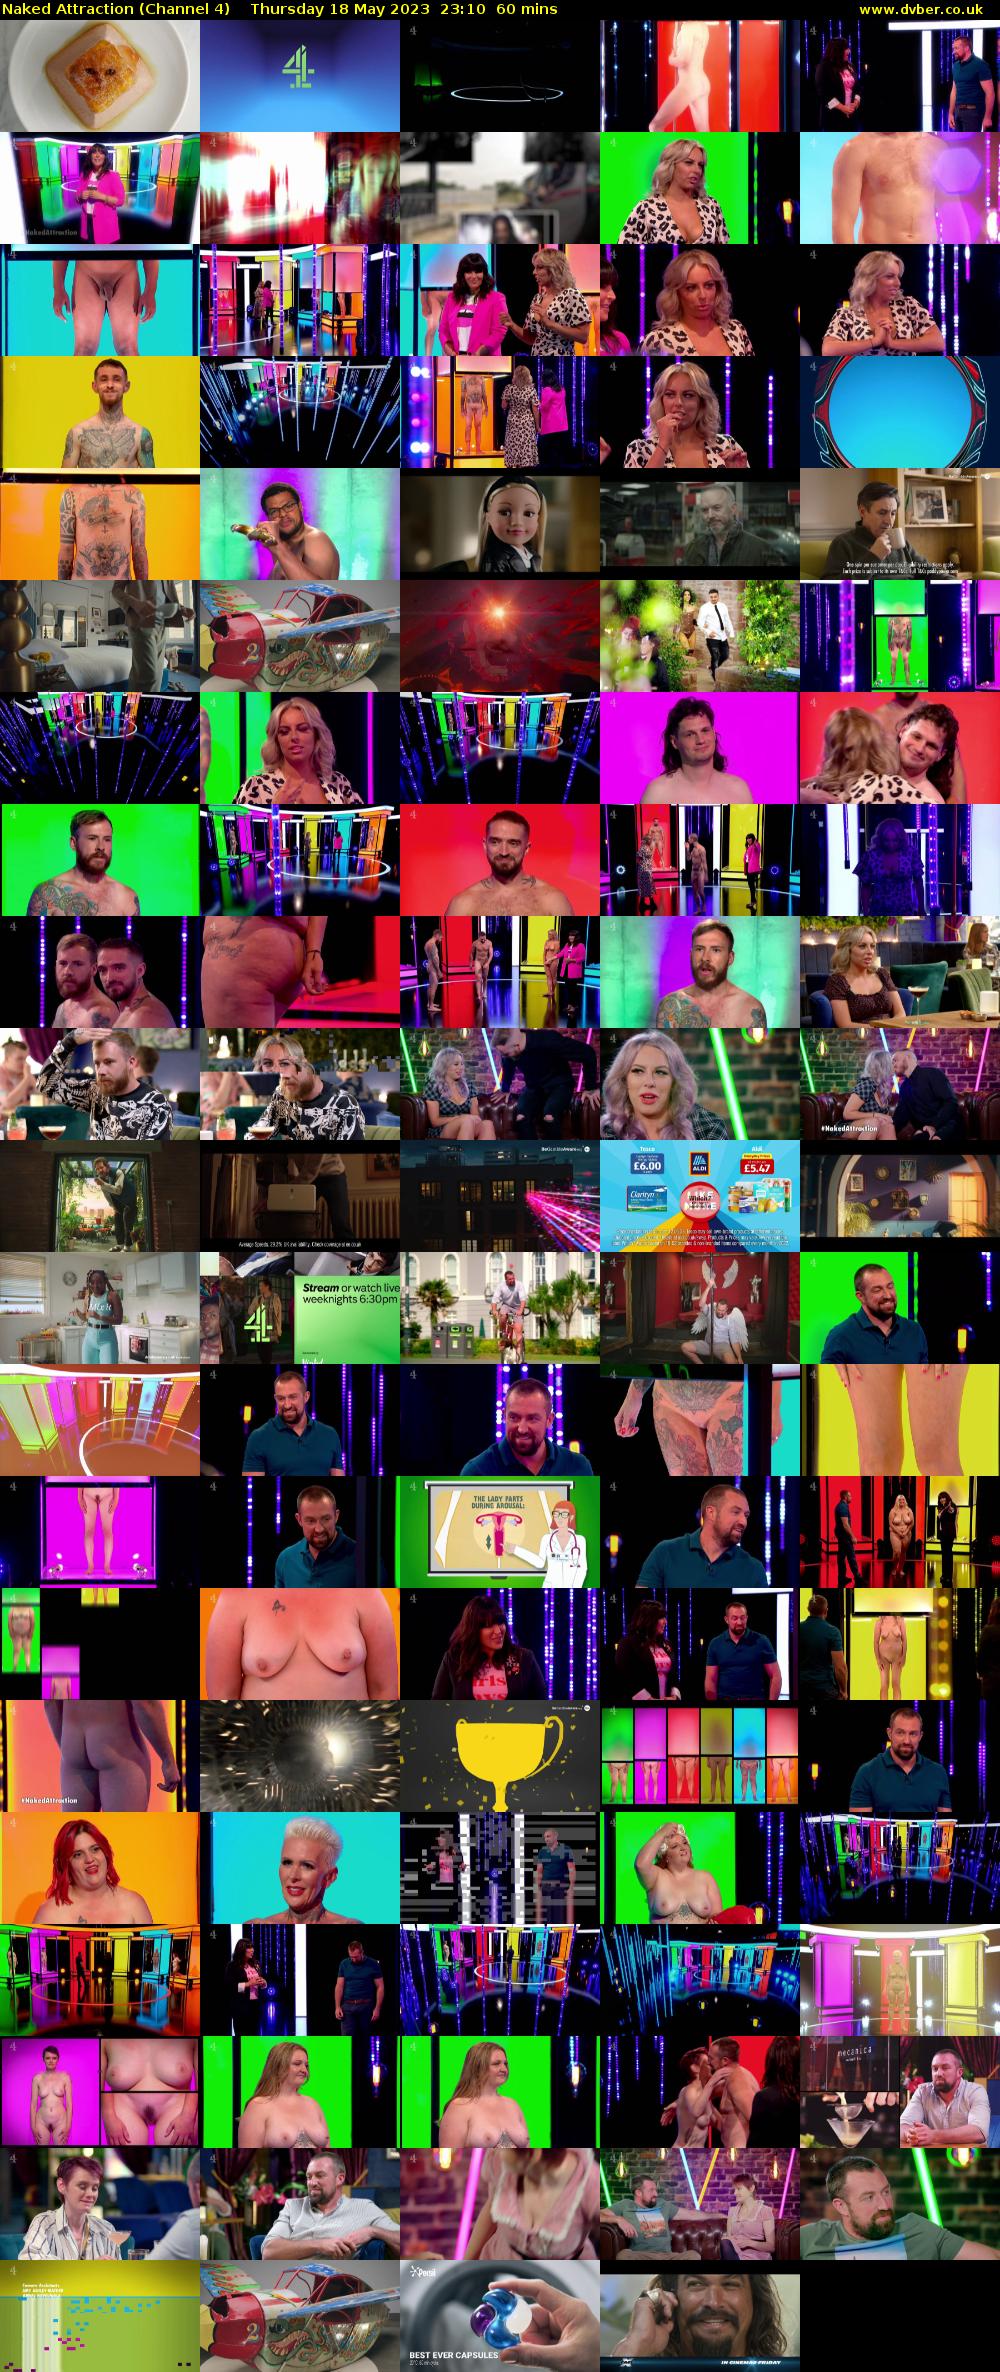 Naked Attraction (Channel 4) Thursday 18 May 2023 23:10 - 00:10